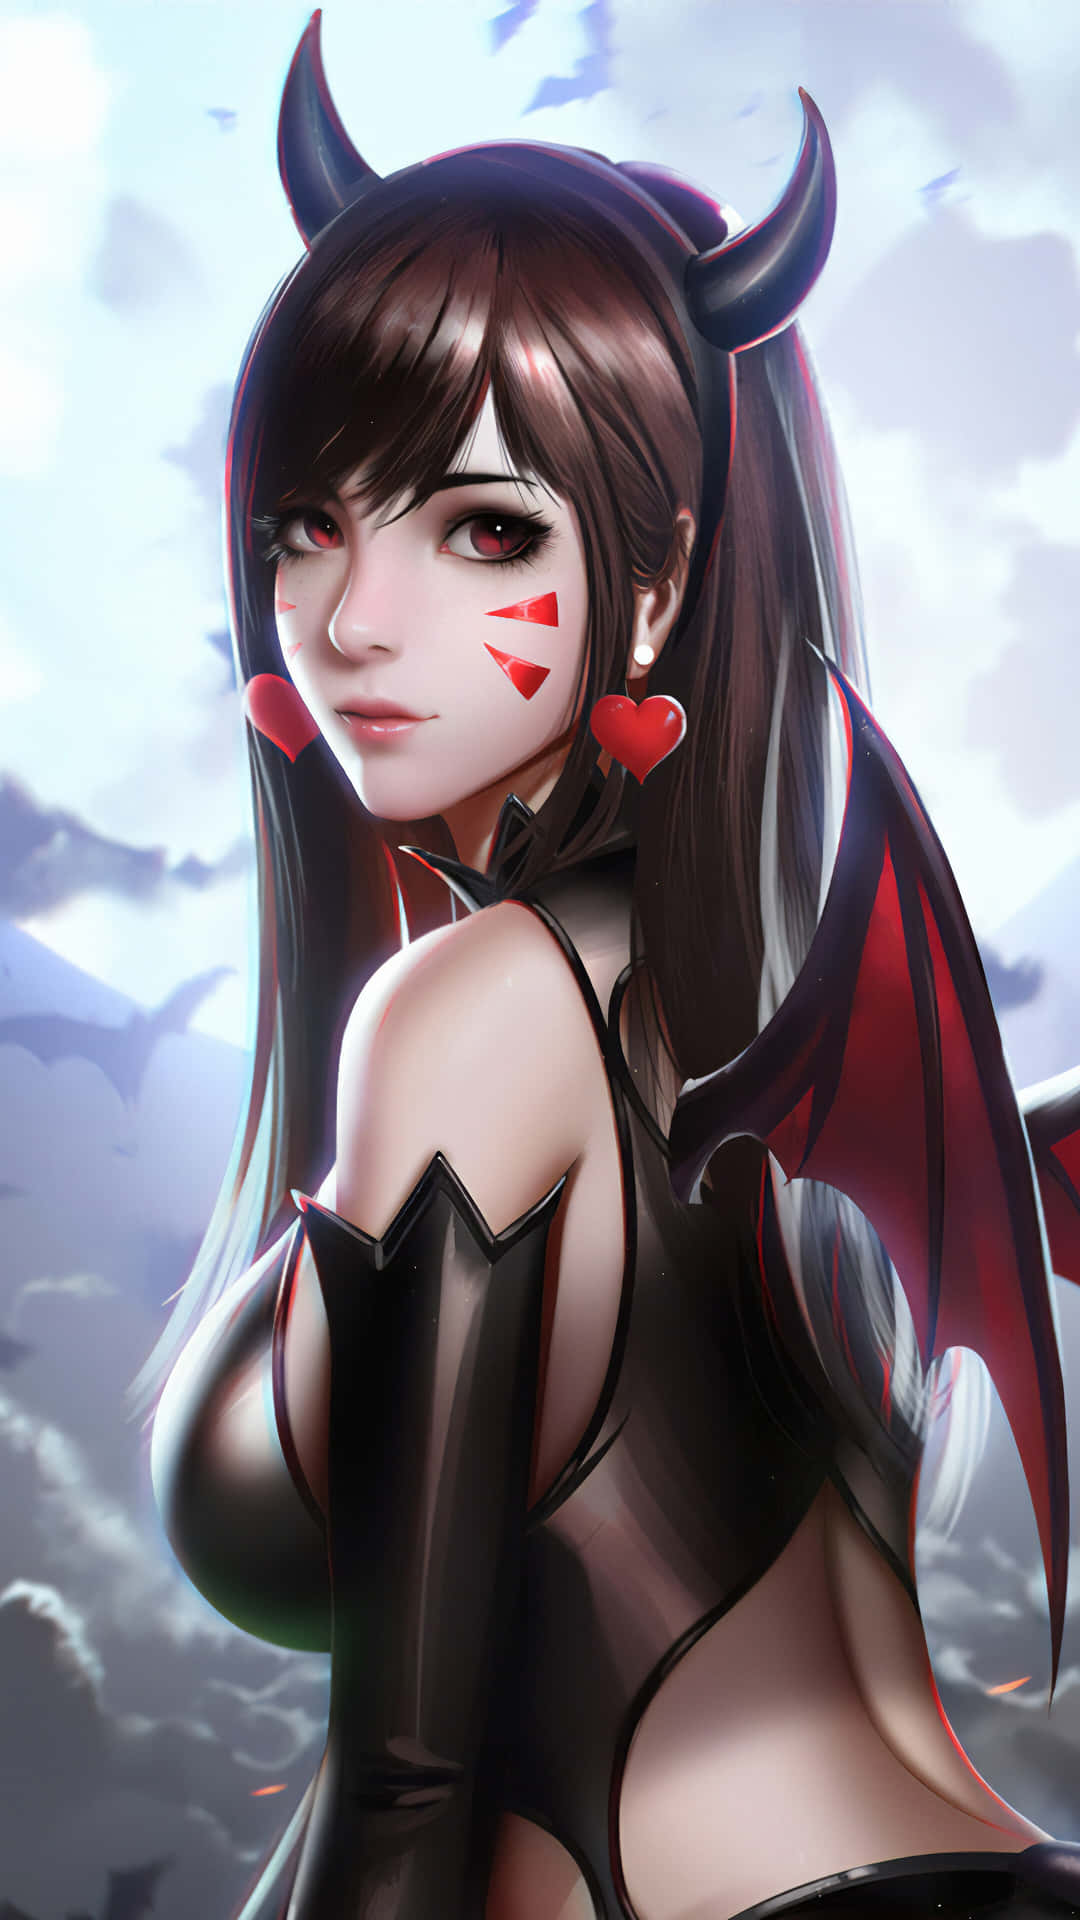 The Devil Girl is Looking Right at You Wallpaper